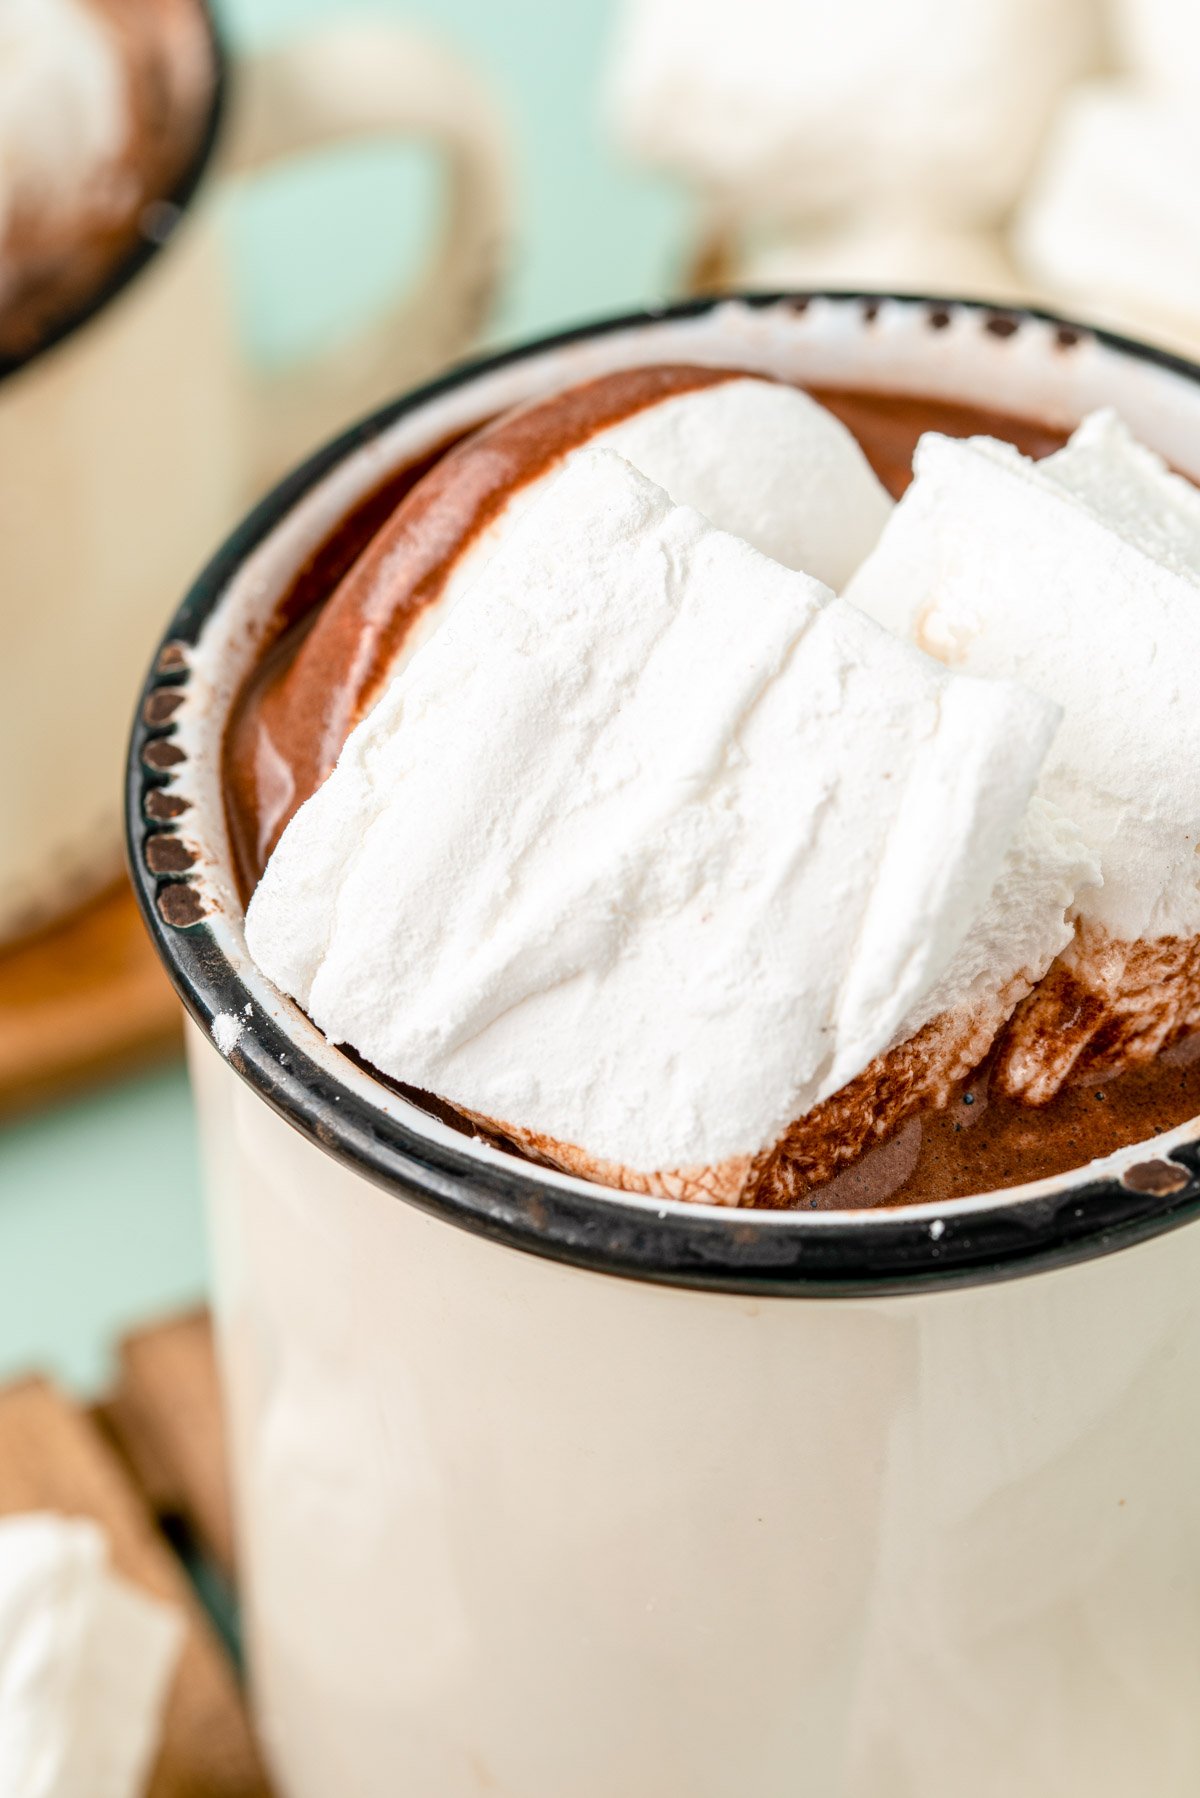 Homemade marshmallows in a white mug filled with hot chocolate.